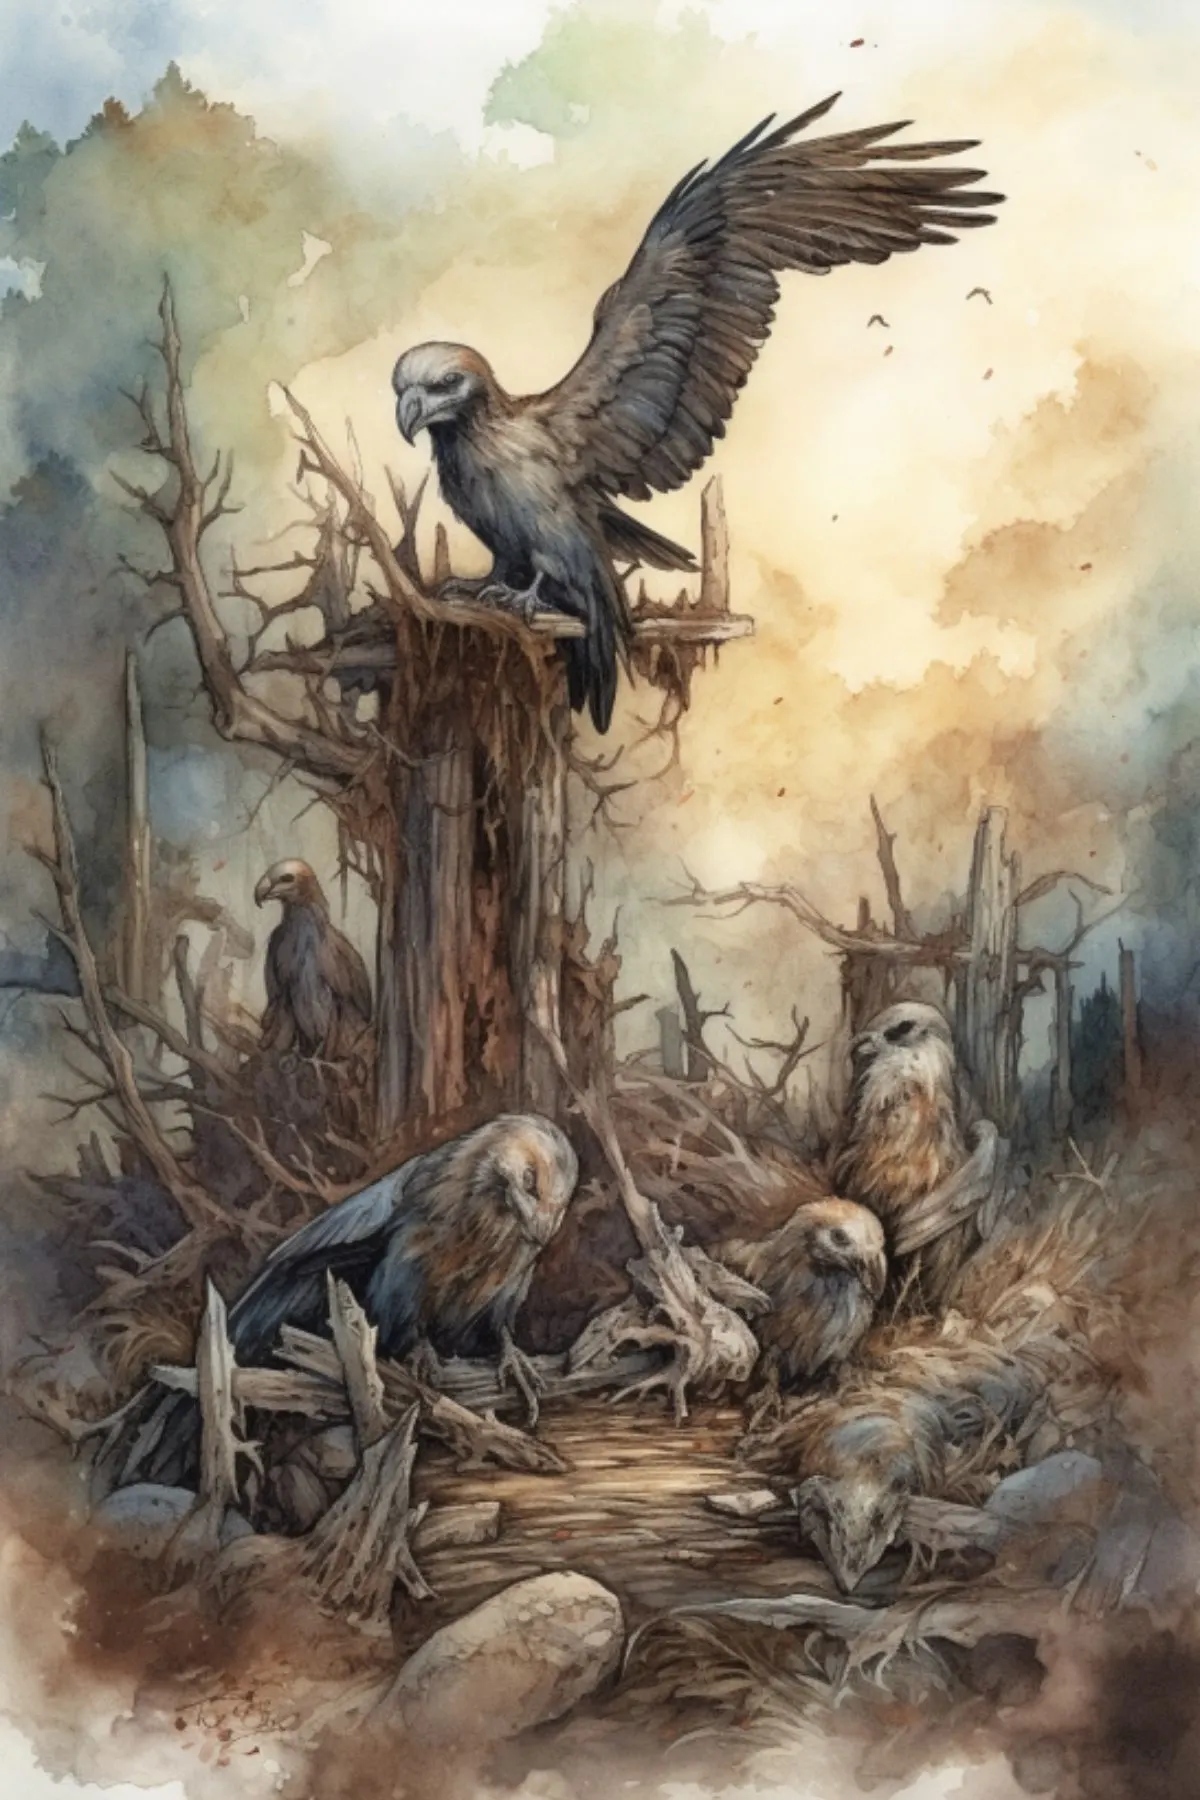 vultures at the end of days watercolor painting inspired by the Bible